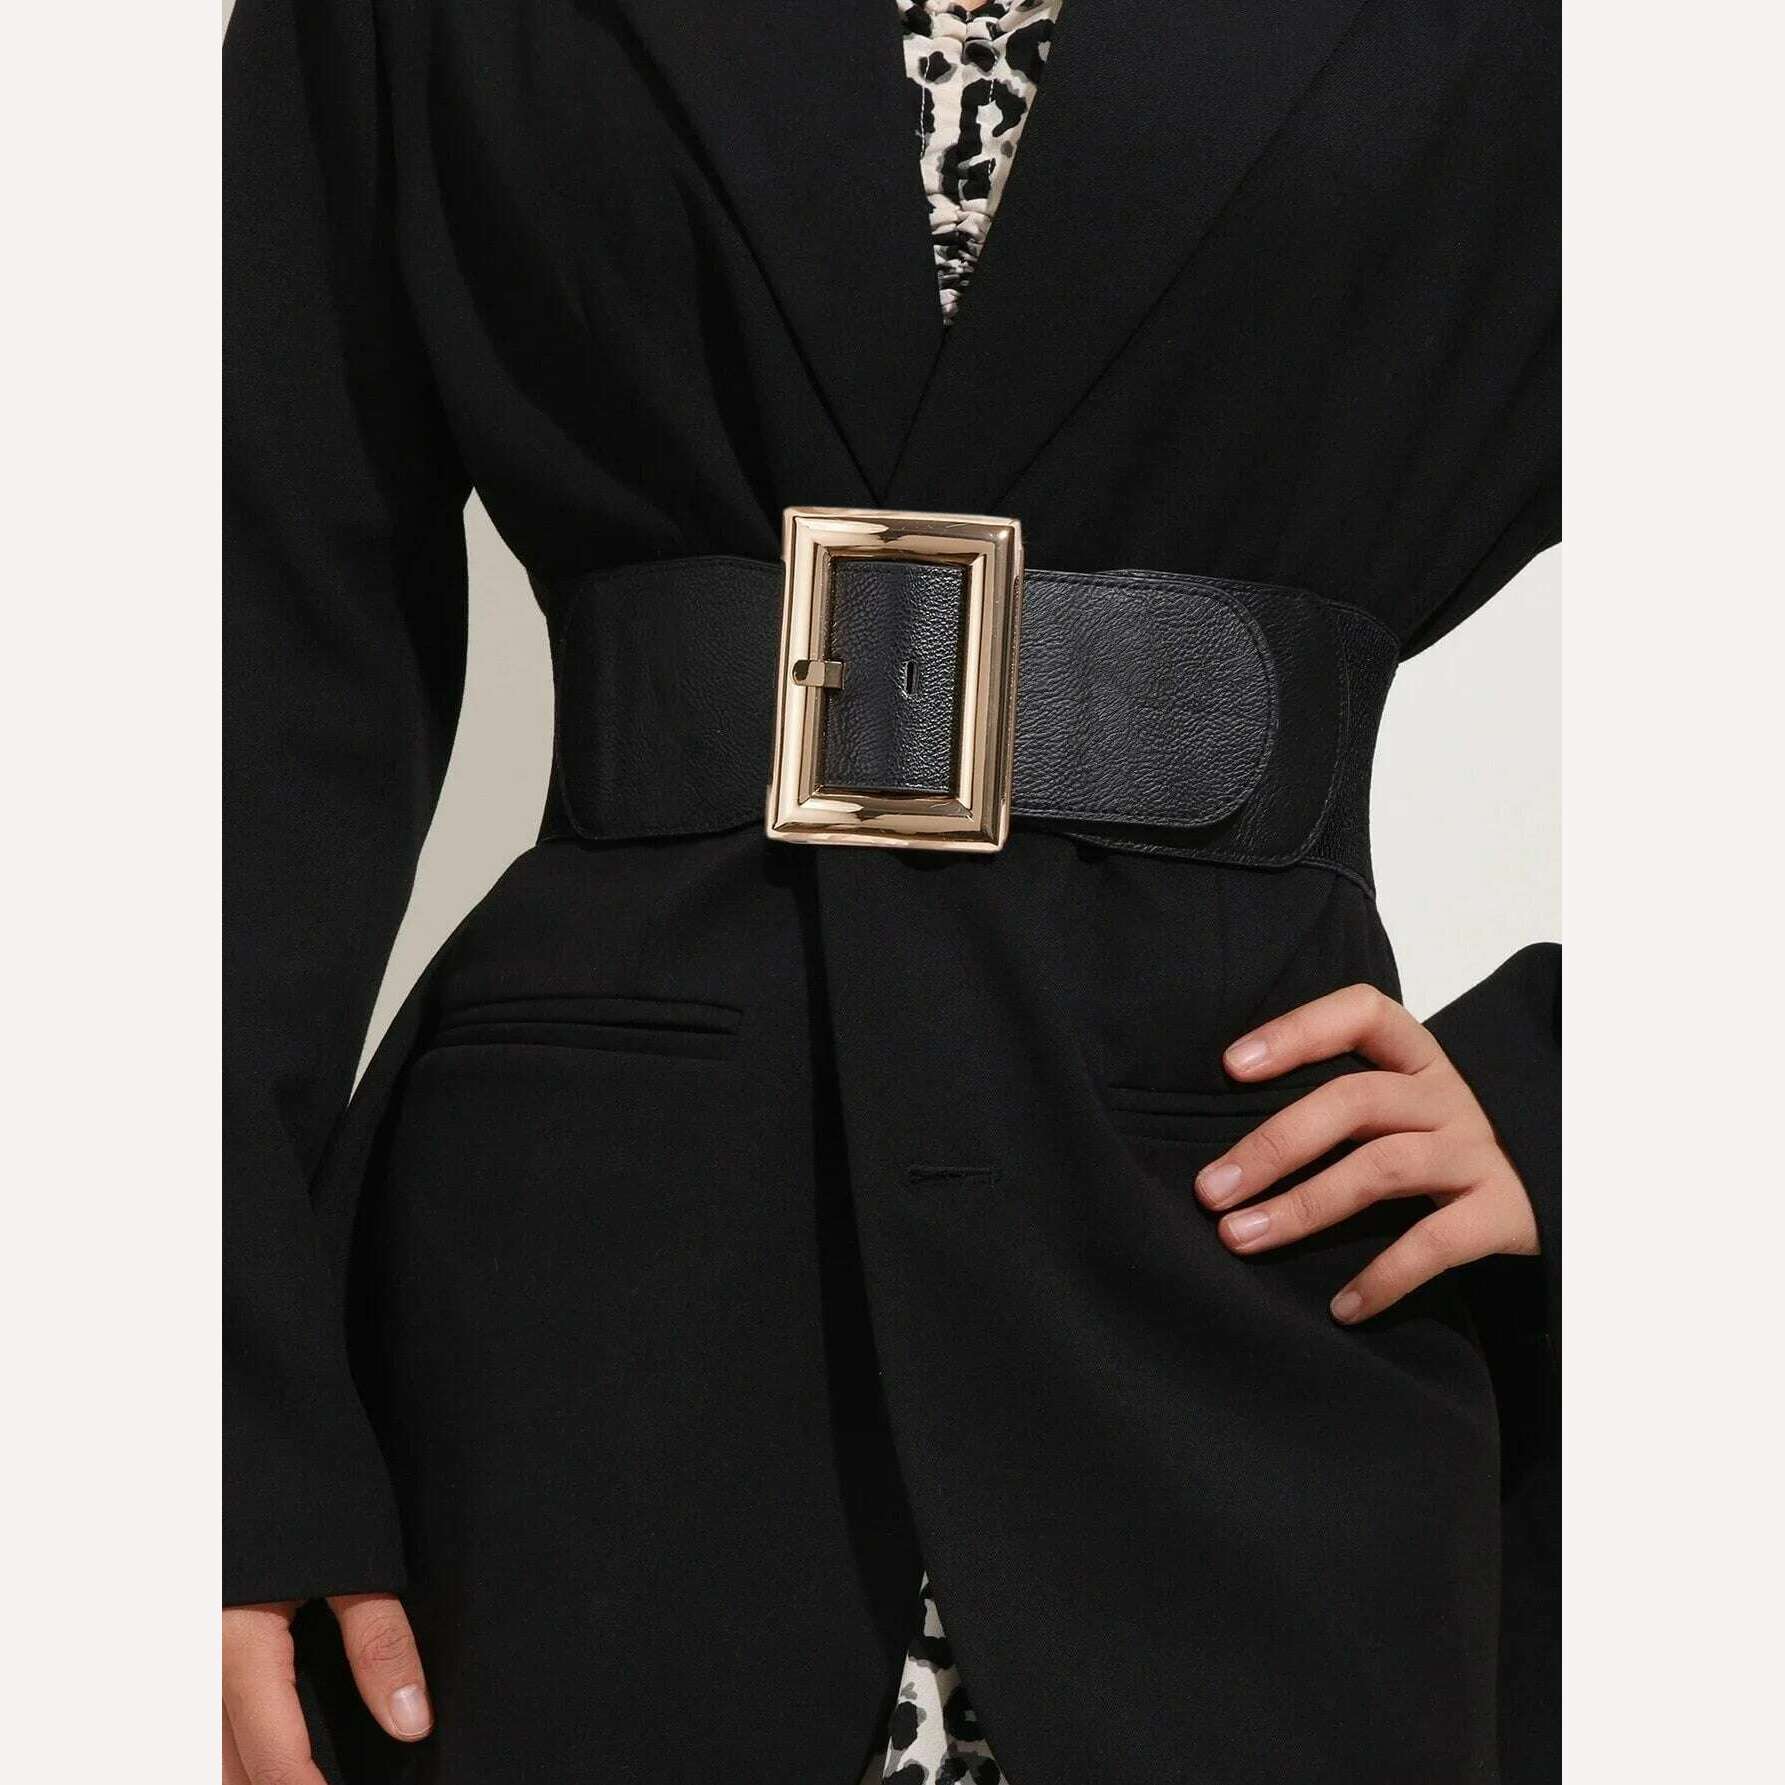 KIMLUD, Wide Square Buckle Women's Elastic Waist Belt To Match Loose Fit Dresses, Coats, Sweaters, Trousers, Skirts, KIMLUD Women's Clothes